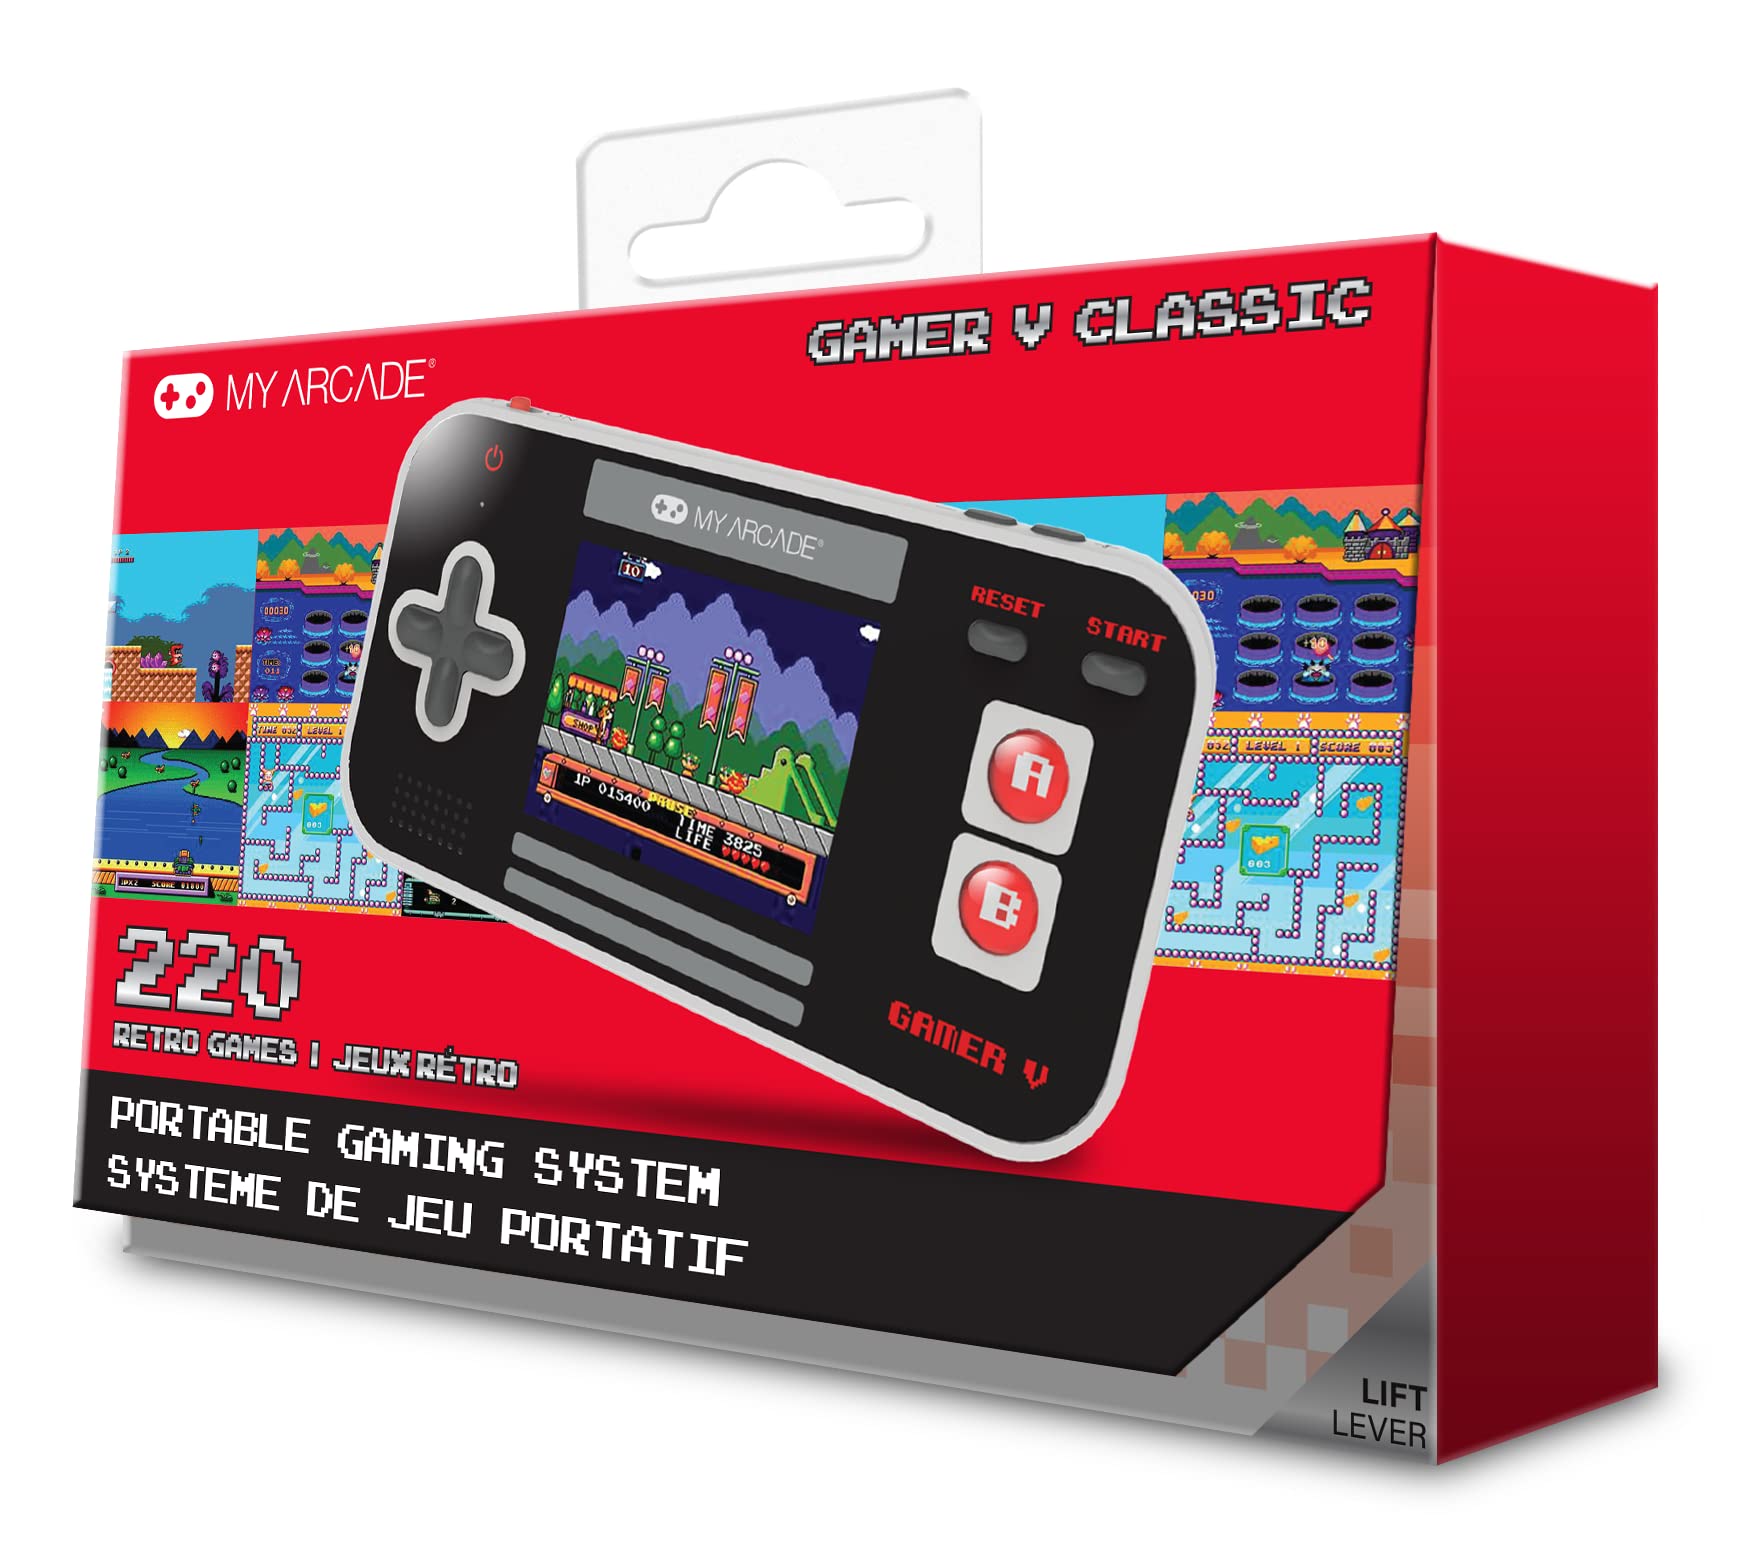 My Arcade Gamer V Classic-Red: Portable Gaming System with 220 Games, 2.5